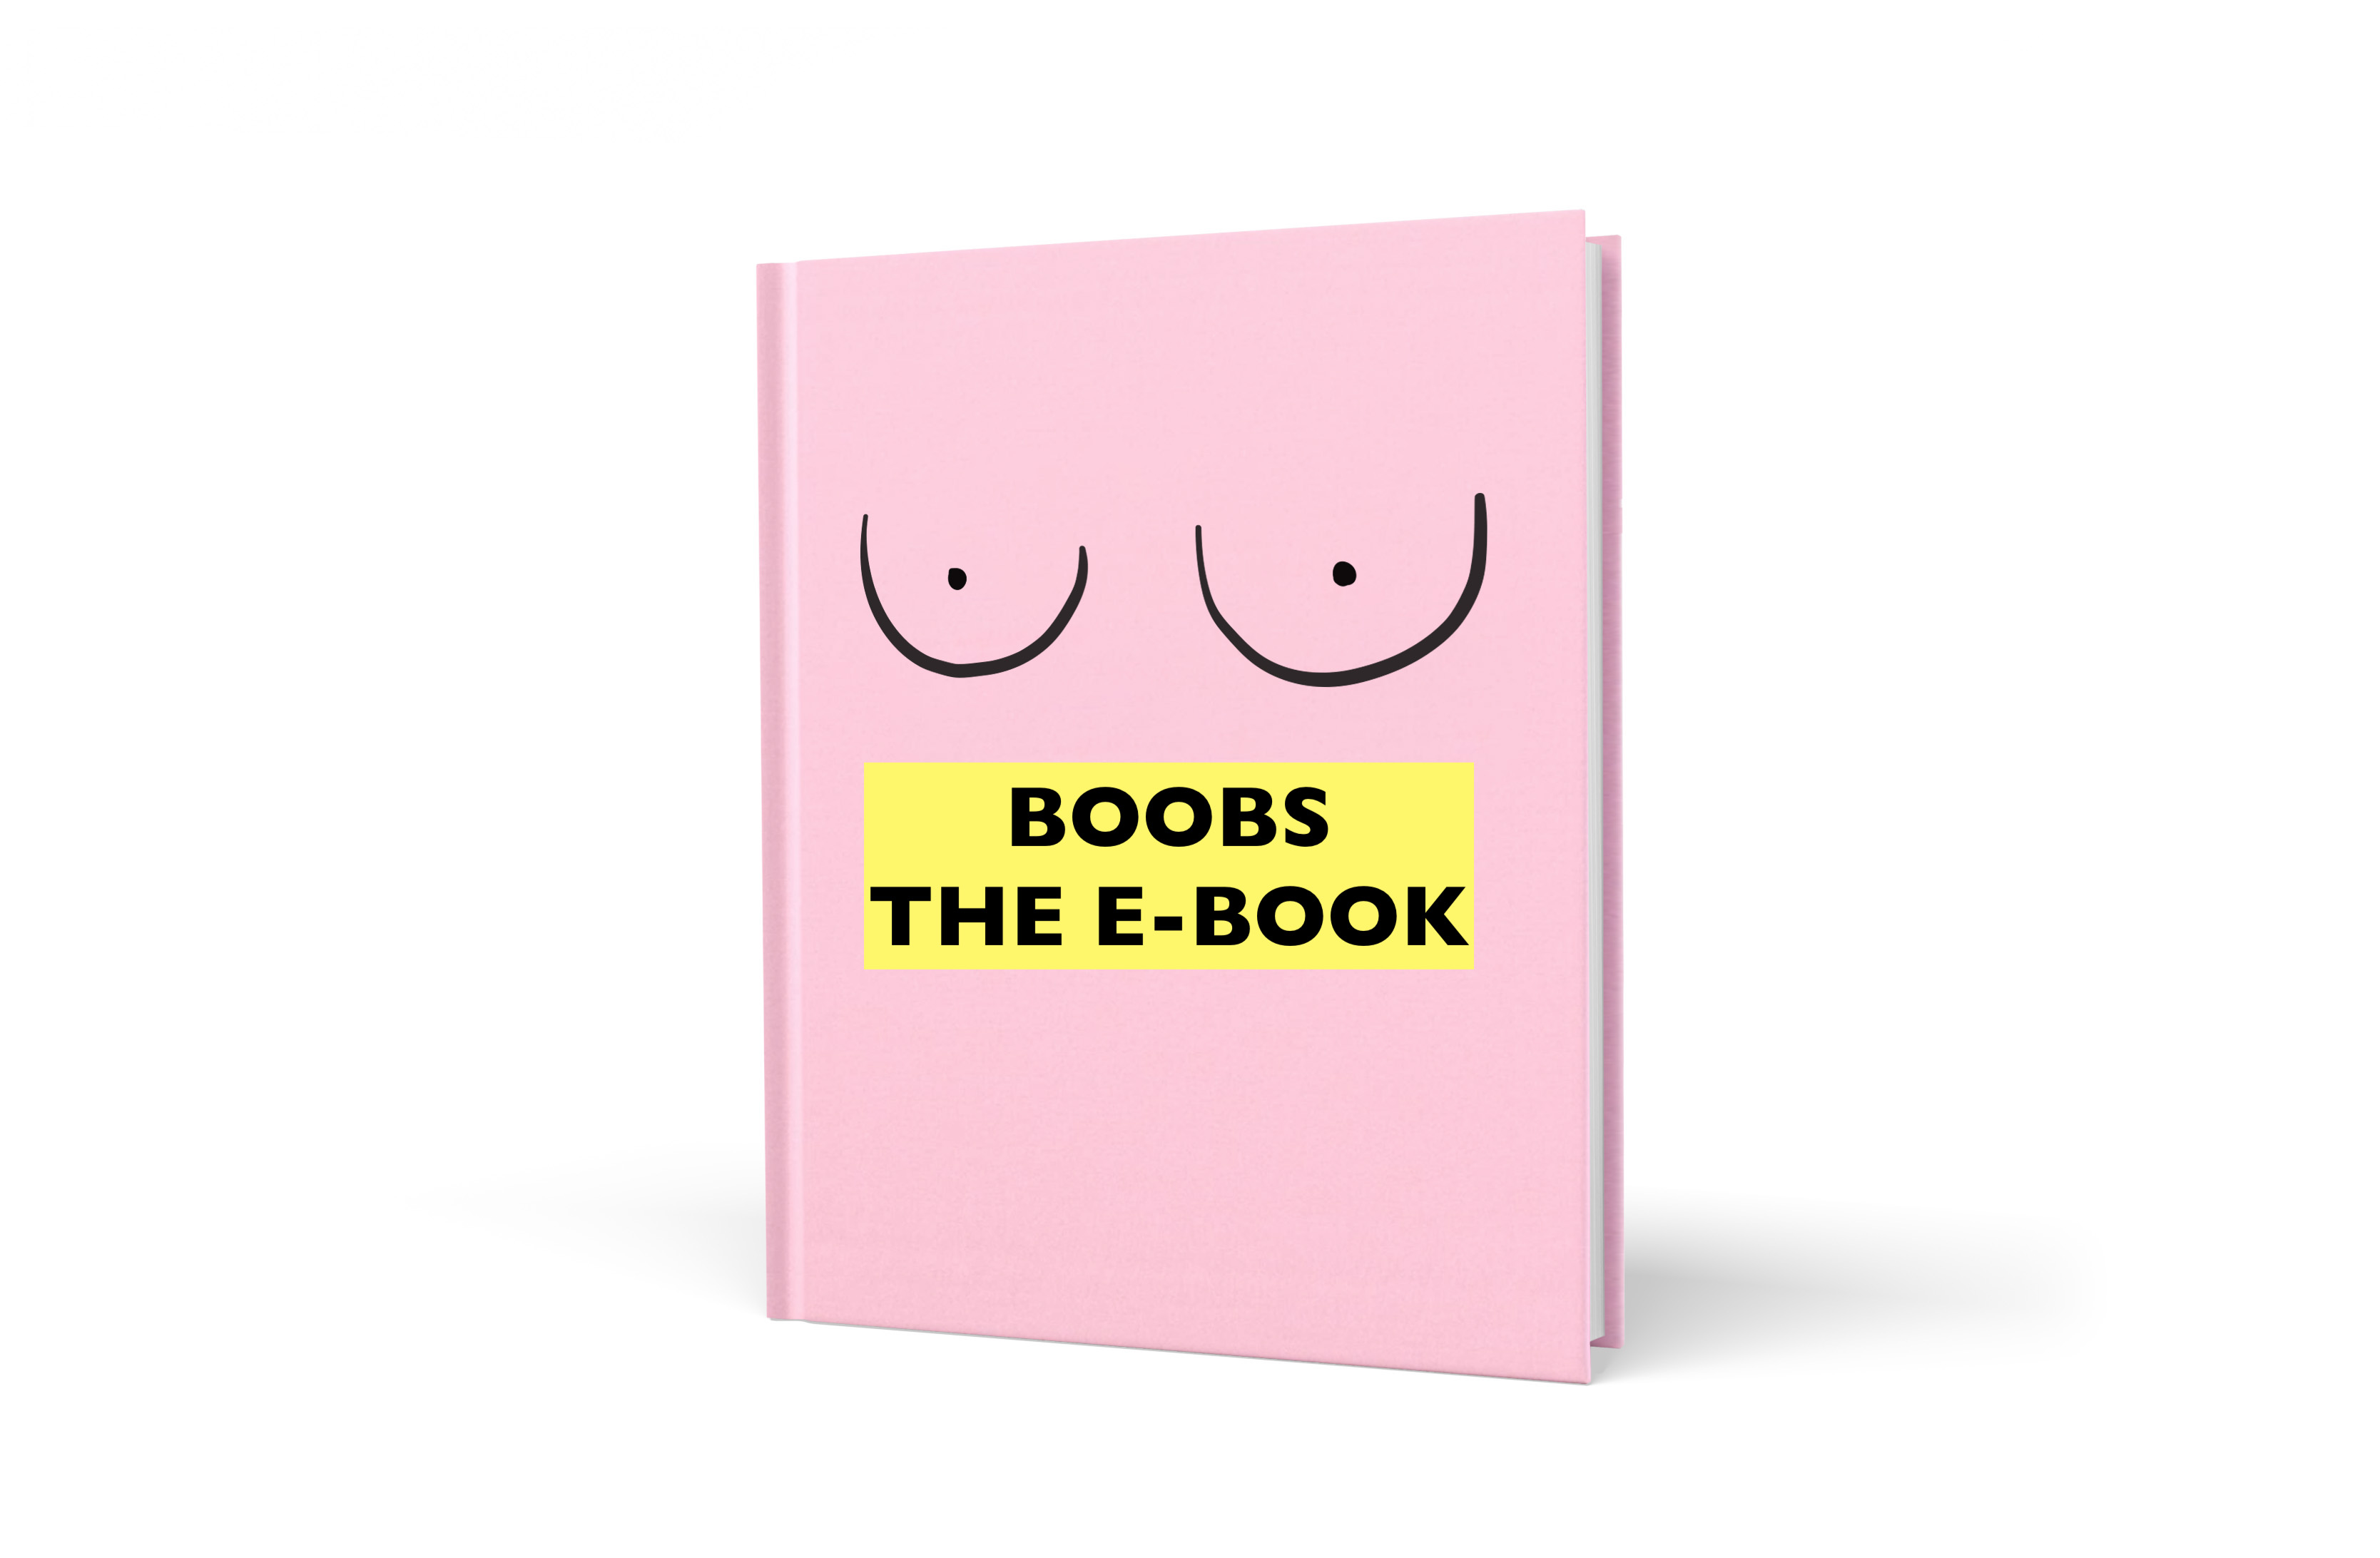 BOOBS - Art for Breast Cancer